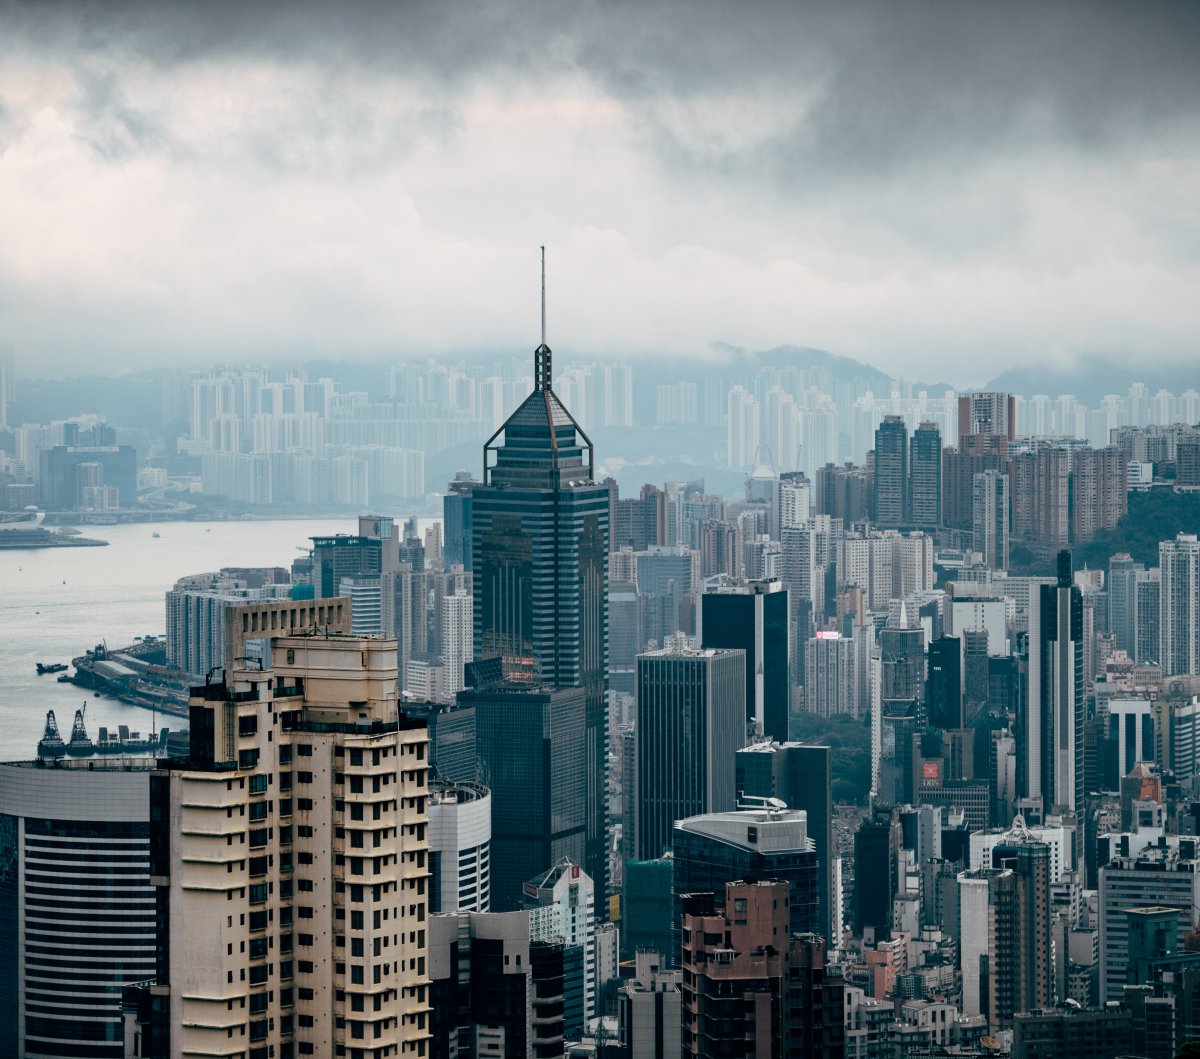 Pictures of Hong Kong with densely populated high-rise buildings